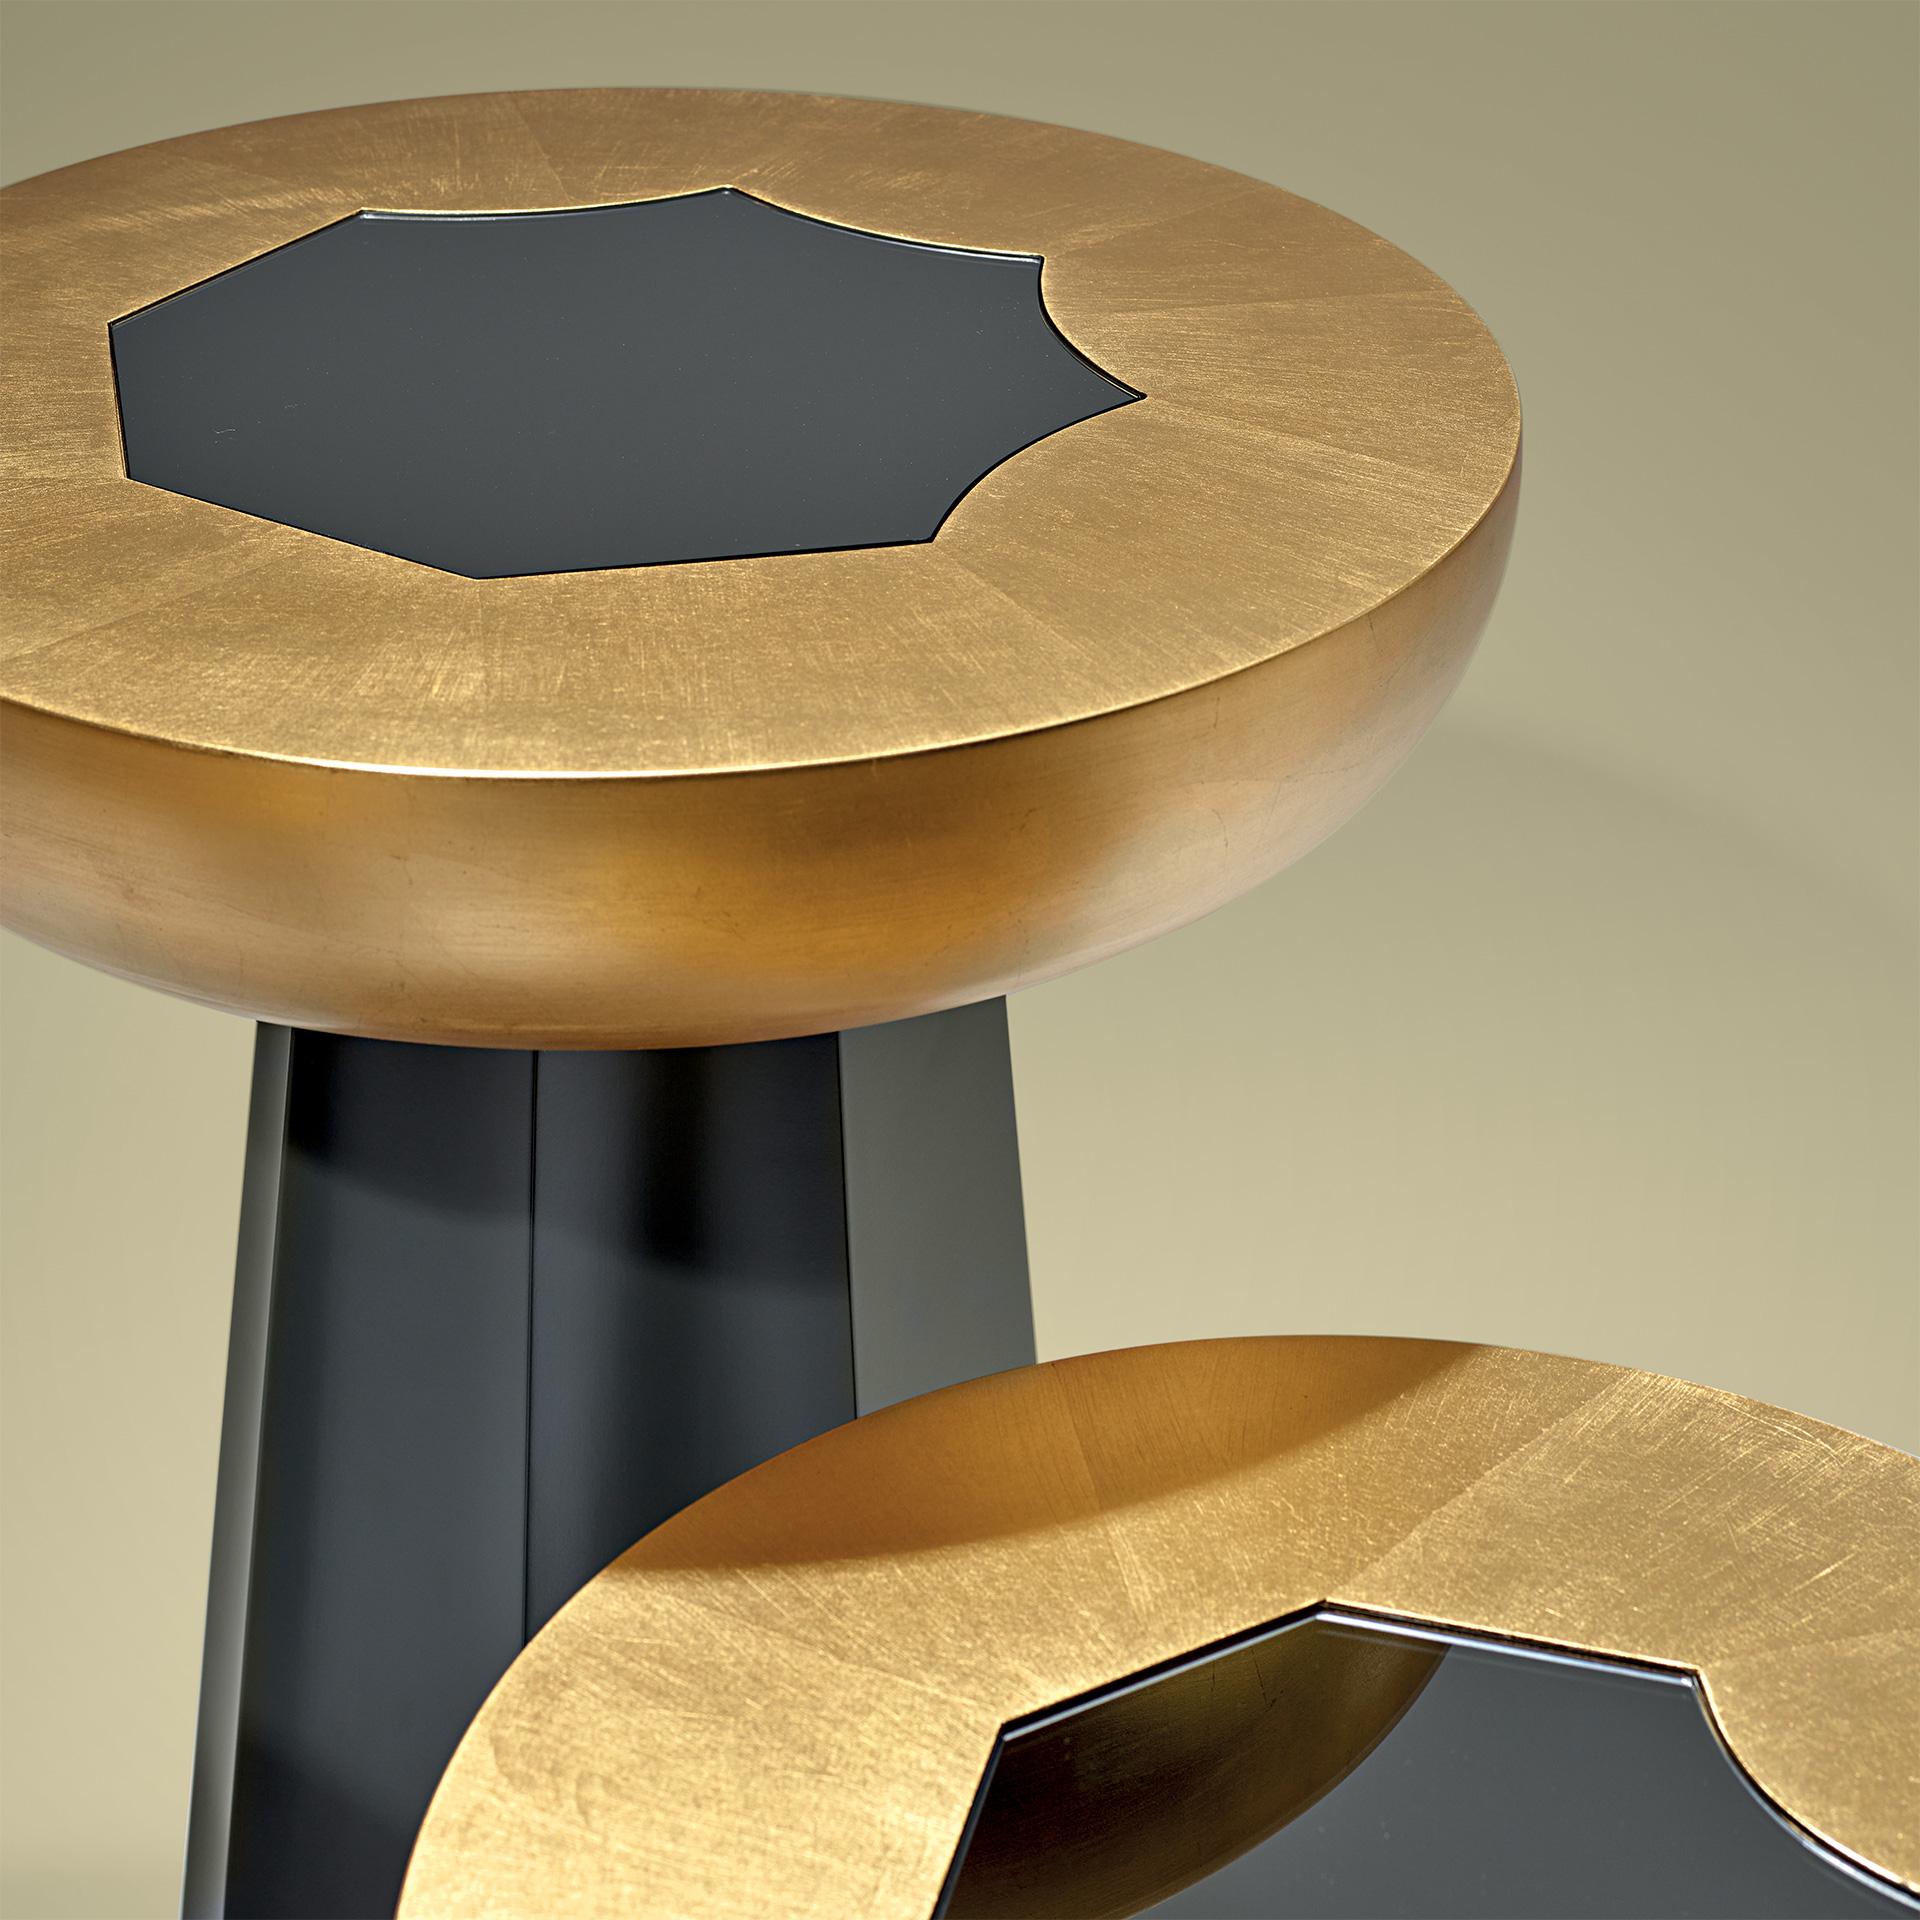 Portuguese Gold Small Table in Gold Leaf and Grey Mirror by Luísa Peixoto